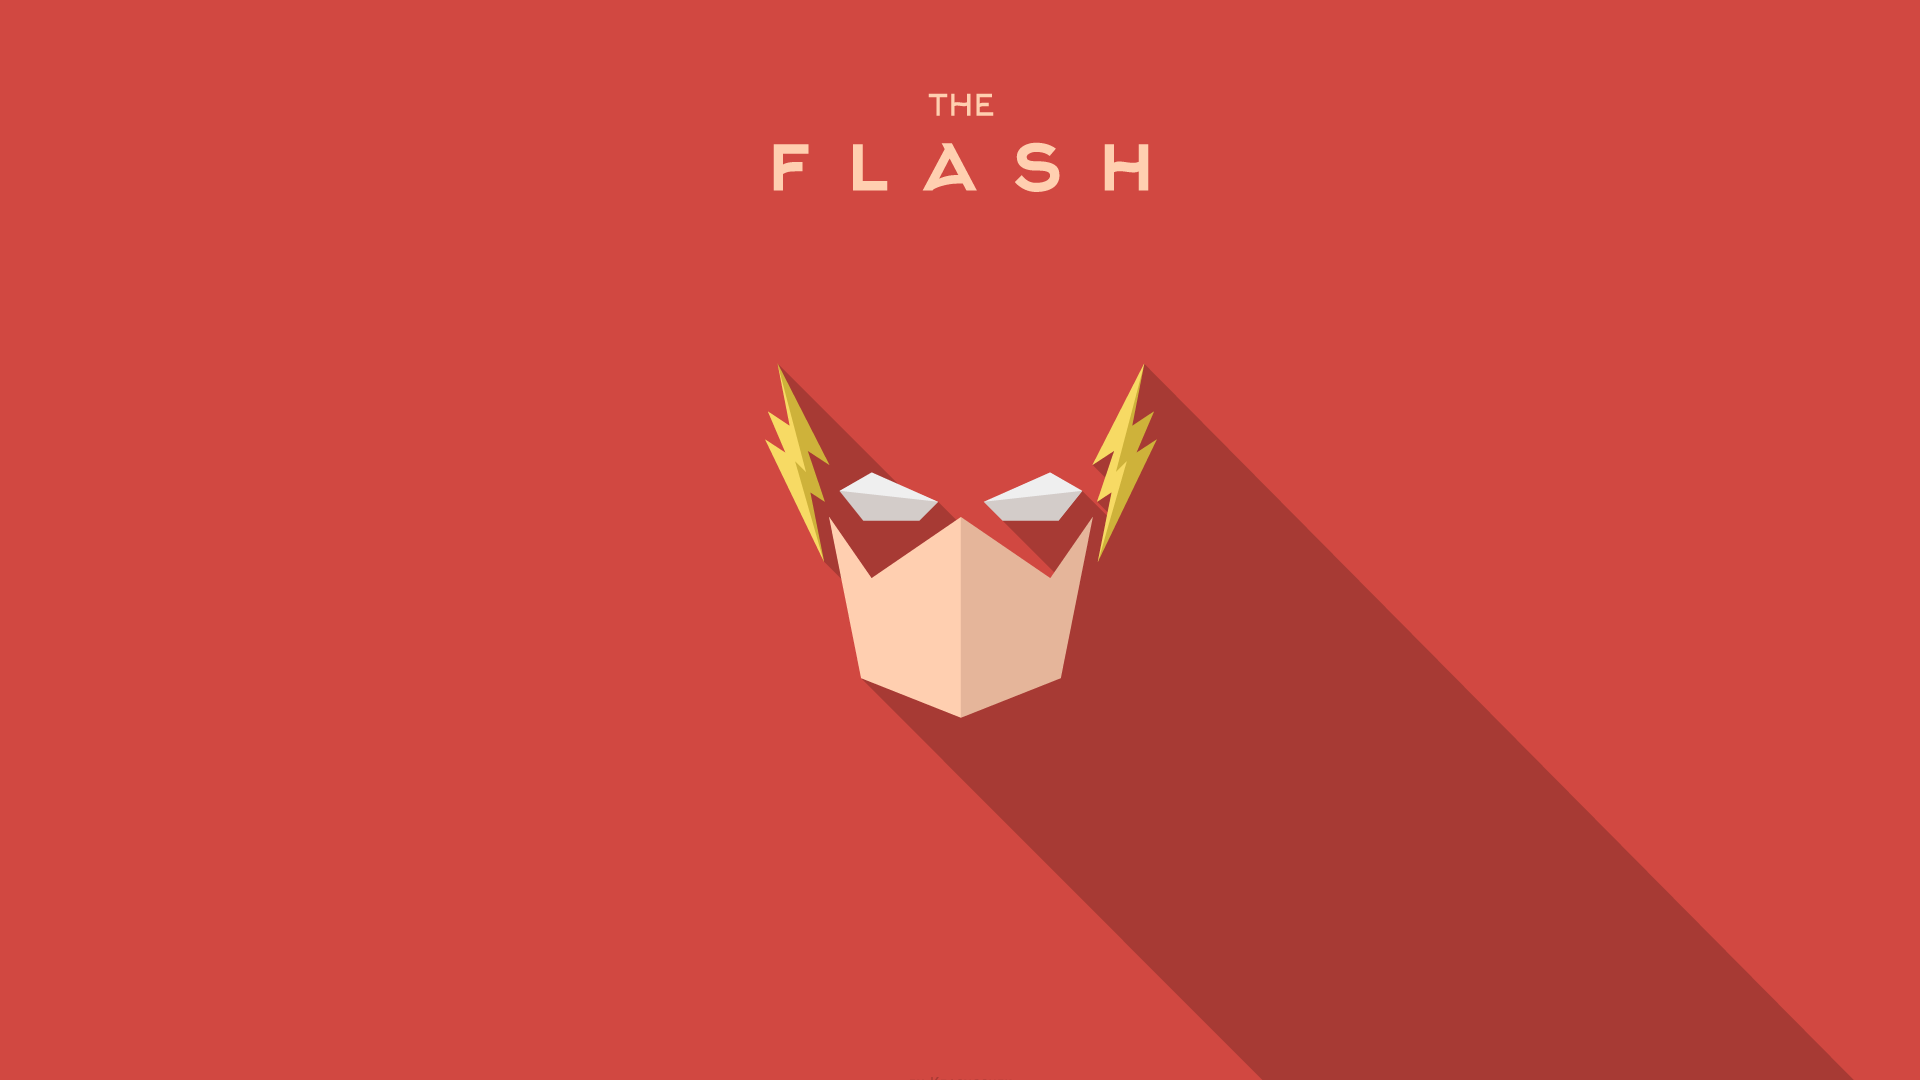 The Flash Picture To Download Wallpaper - Flash Wallpaper Hd , HD Wallpaper & Backgrounds